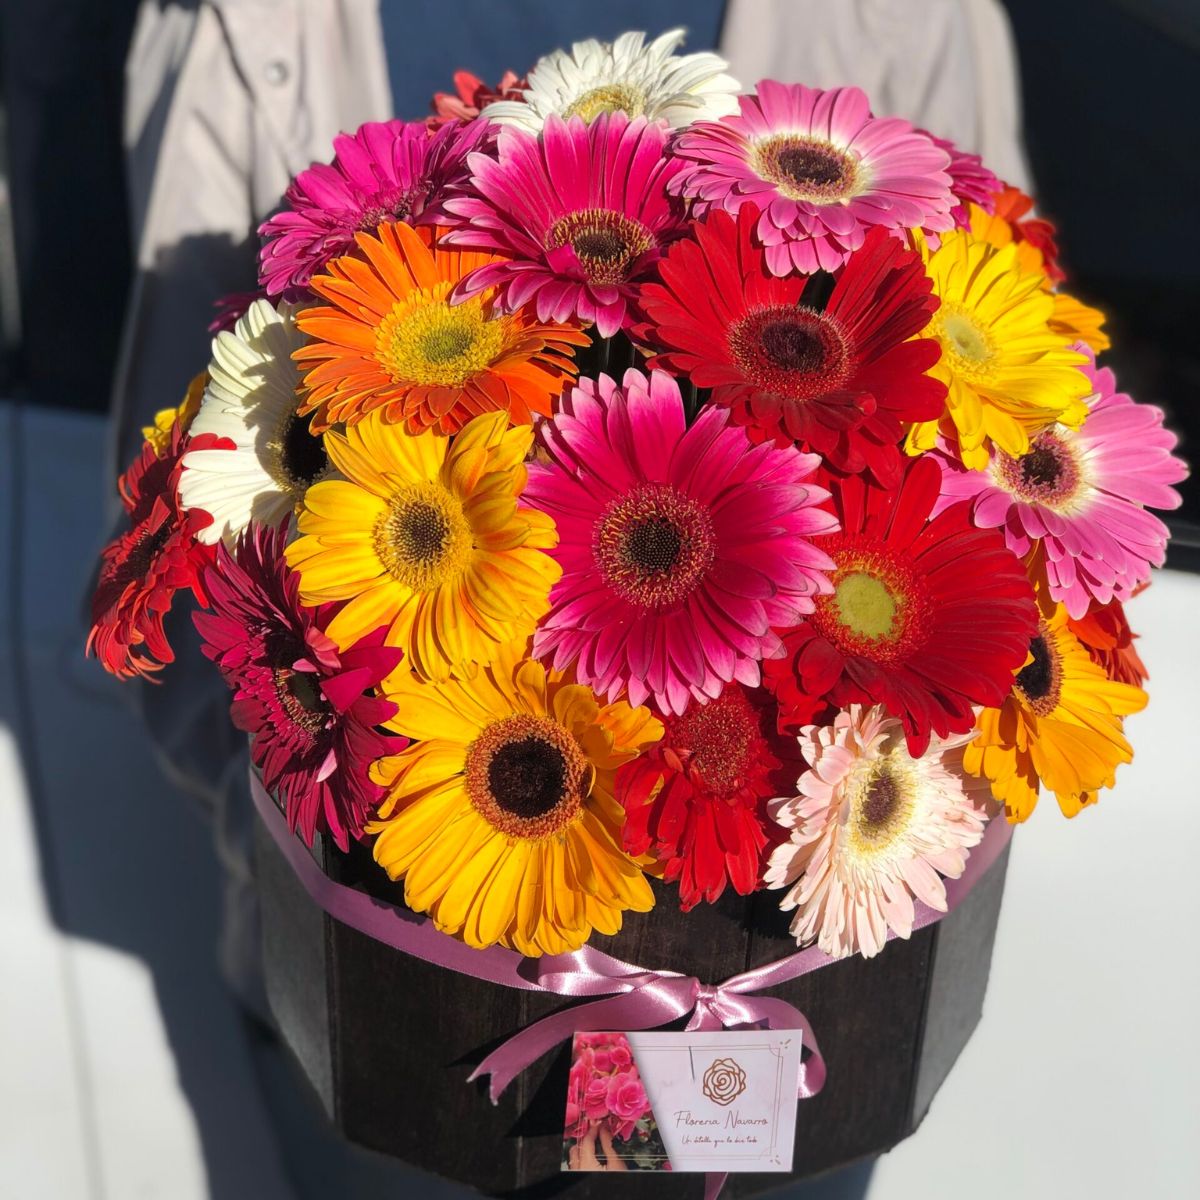 A wonderful and meaningful gift with gerberas